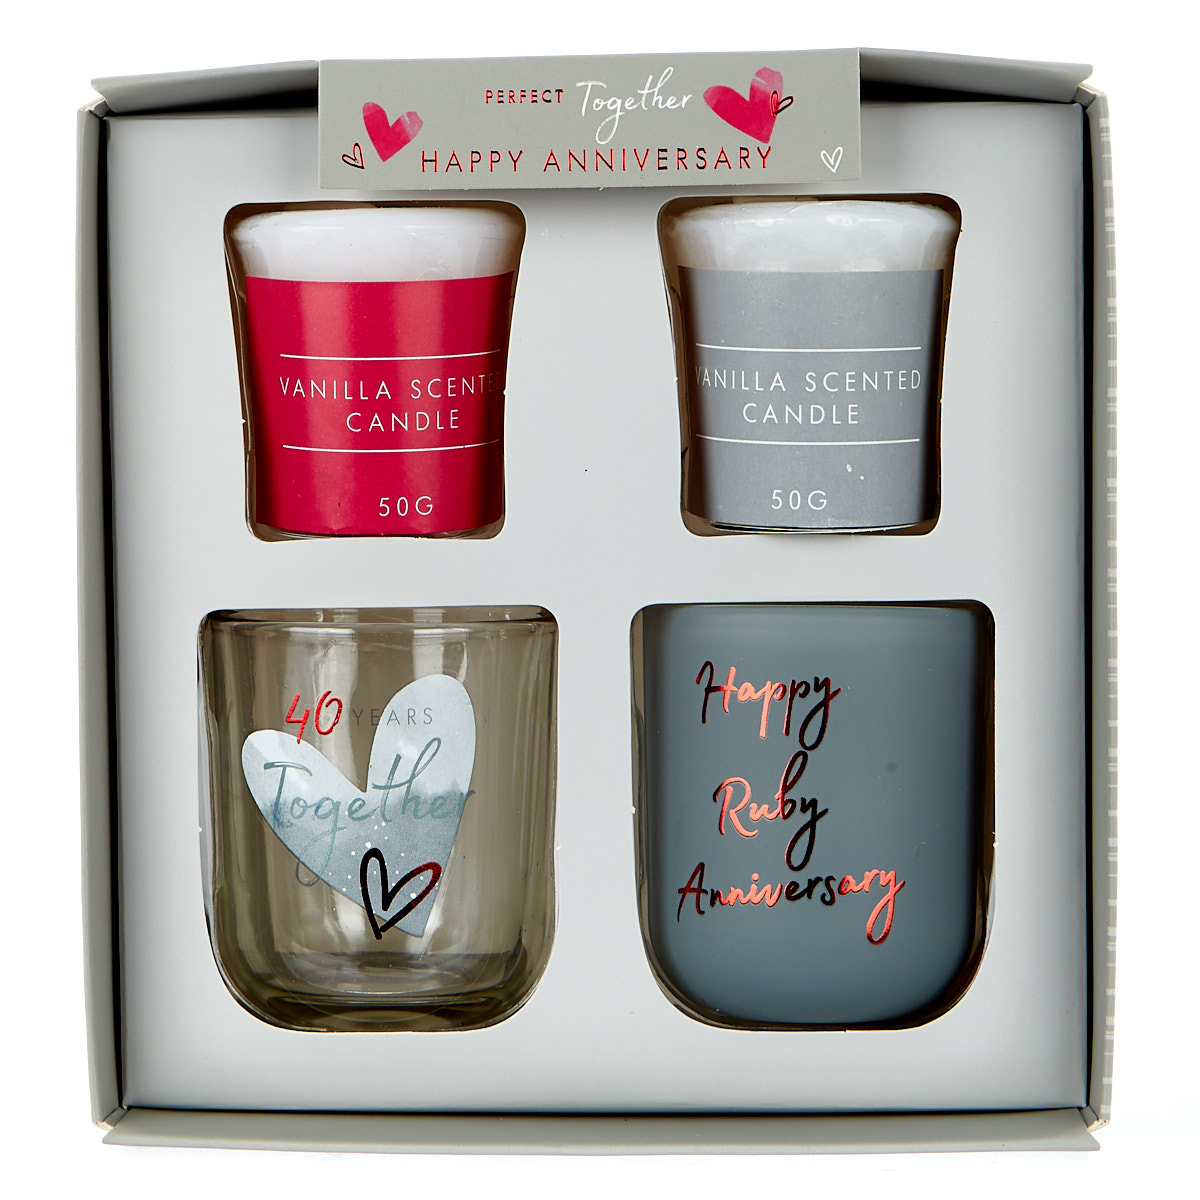 Set of 2 Vanilla Scented Candles - 40th Anniversary